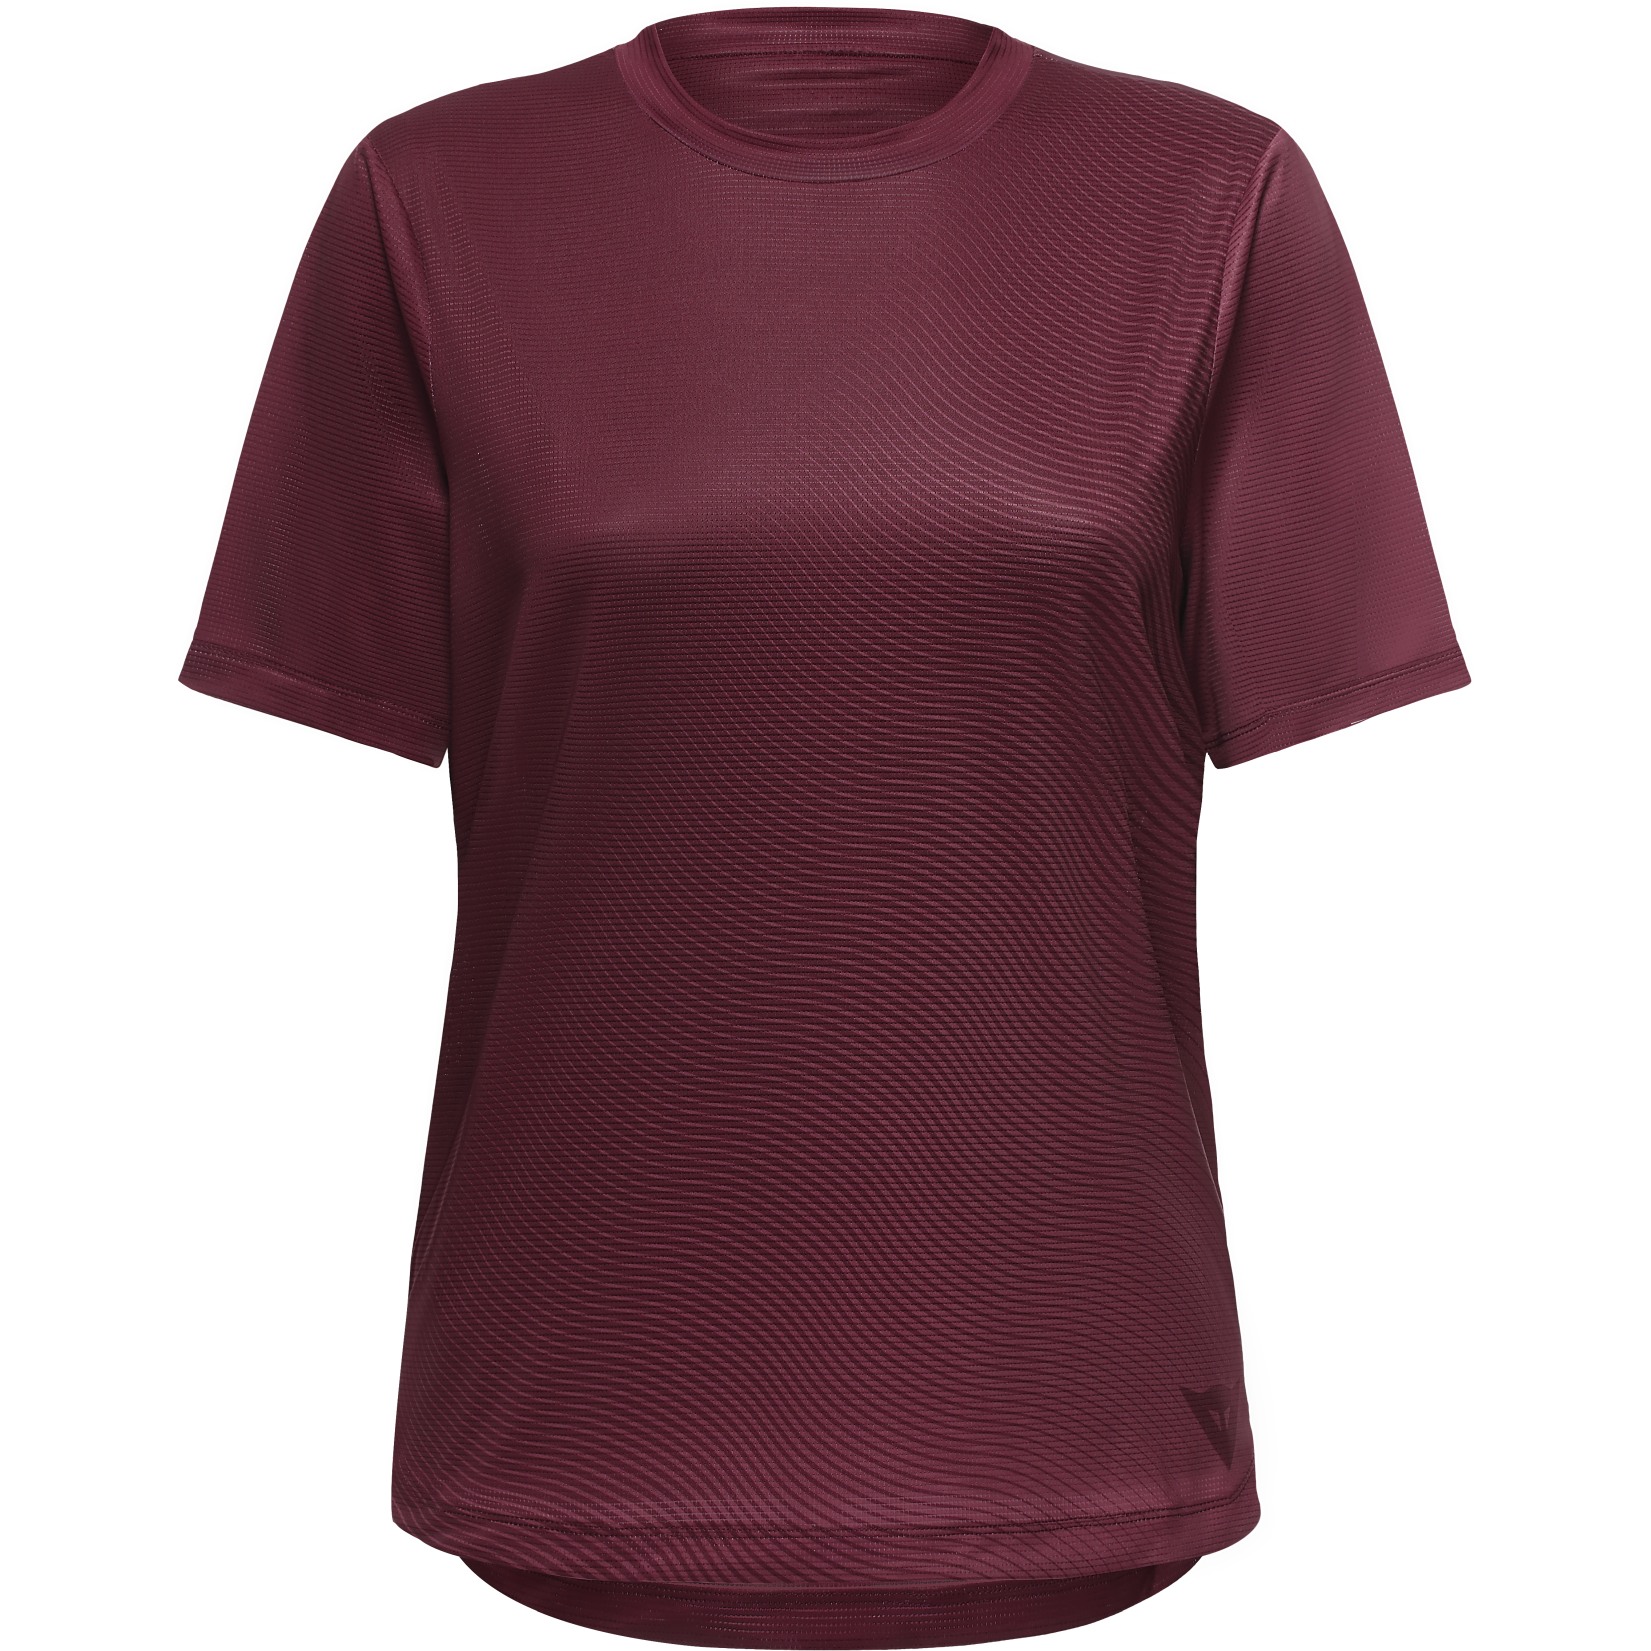 Picture of Dainese HgAER Short Sleeve Jersey Women - windsor wine